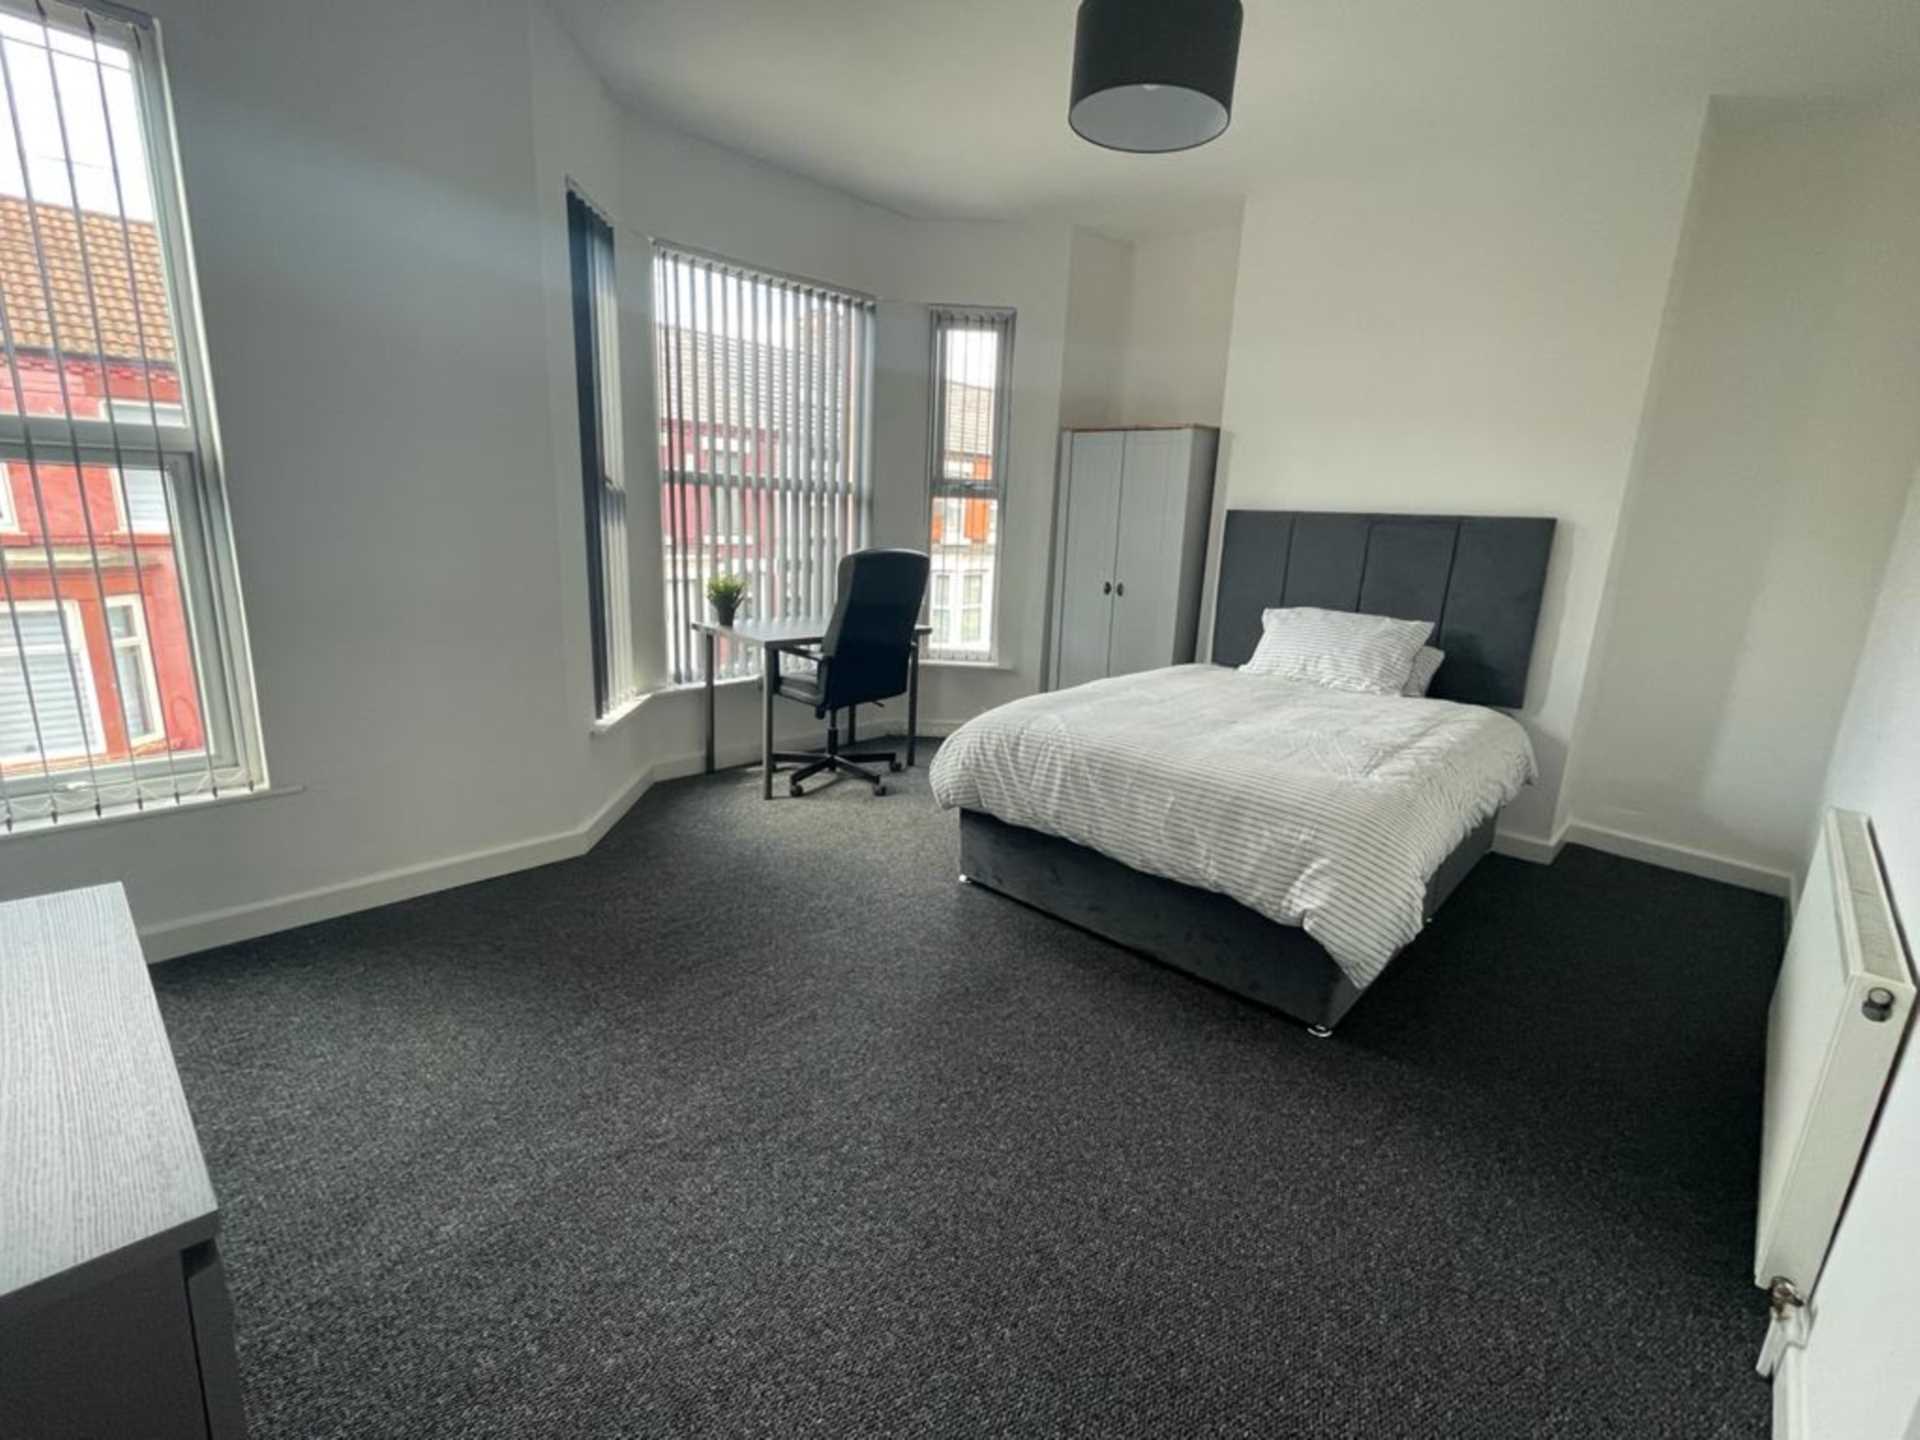 Thornycroft Road, Wavertree - 2 ROOMS AVAILABLE - STUDENTS/PROFESSIONALS, Image 1